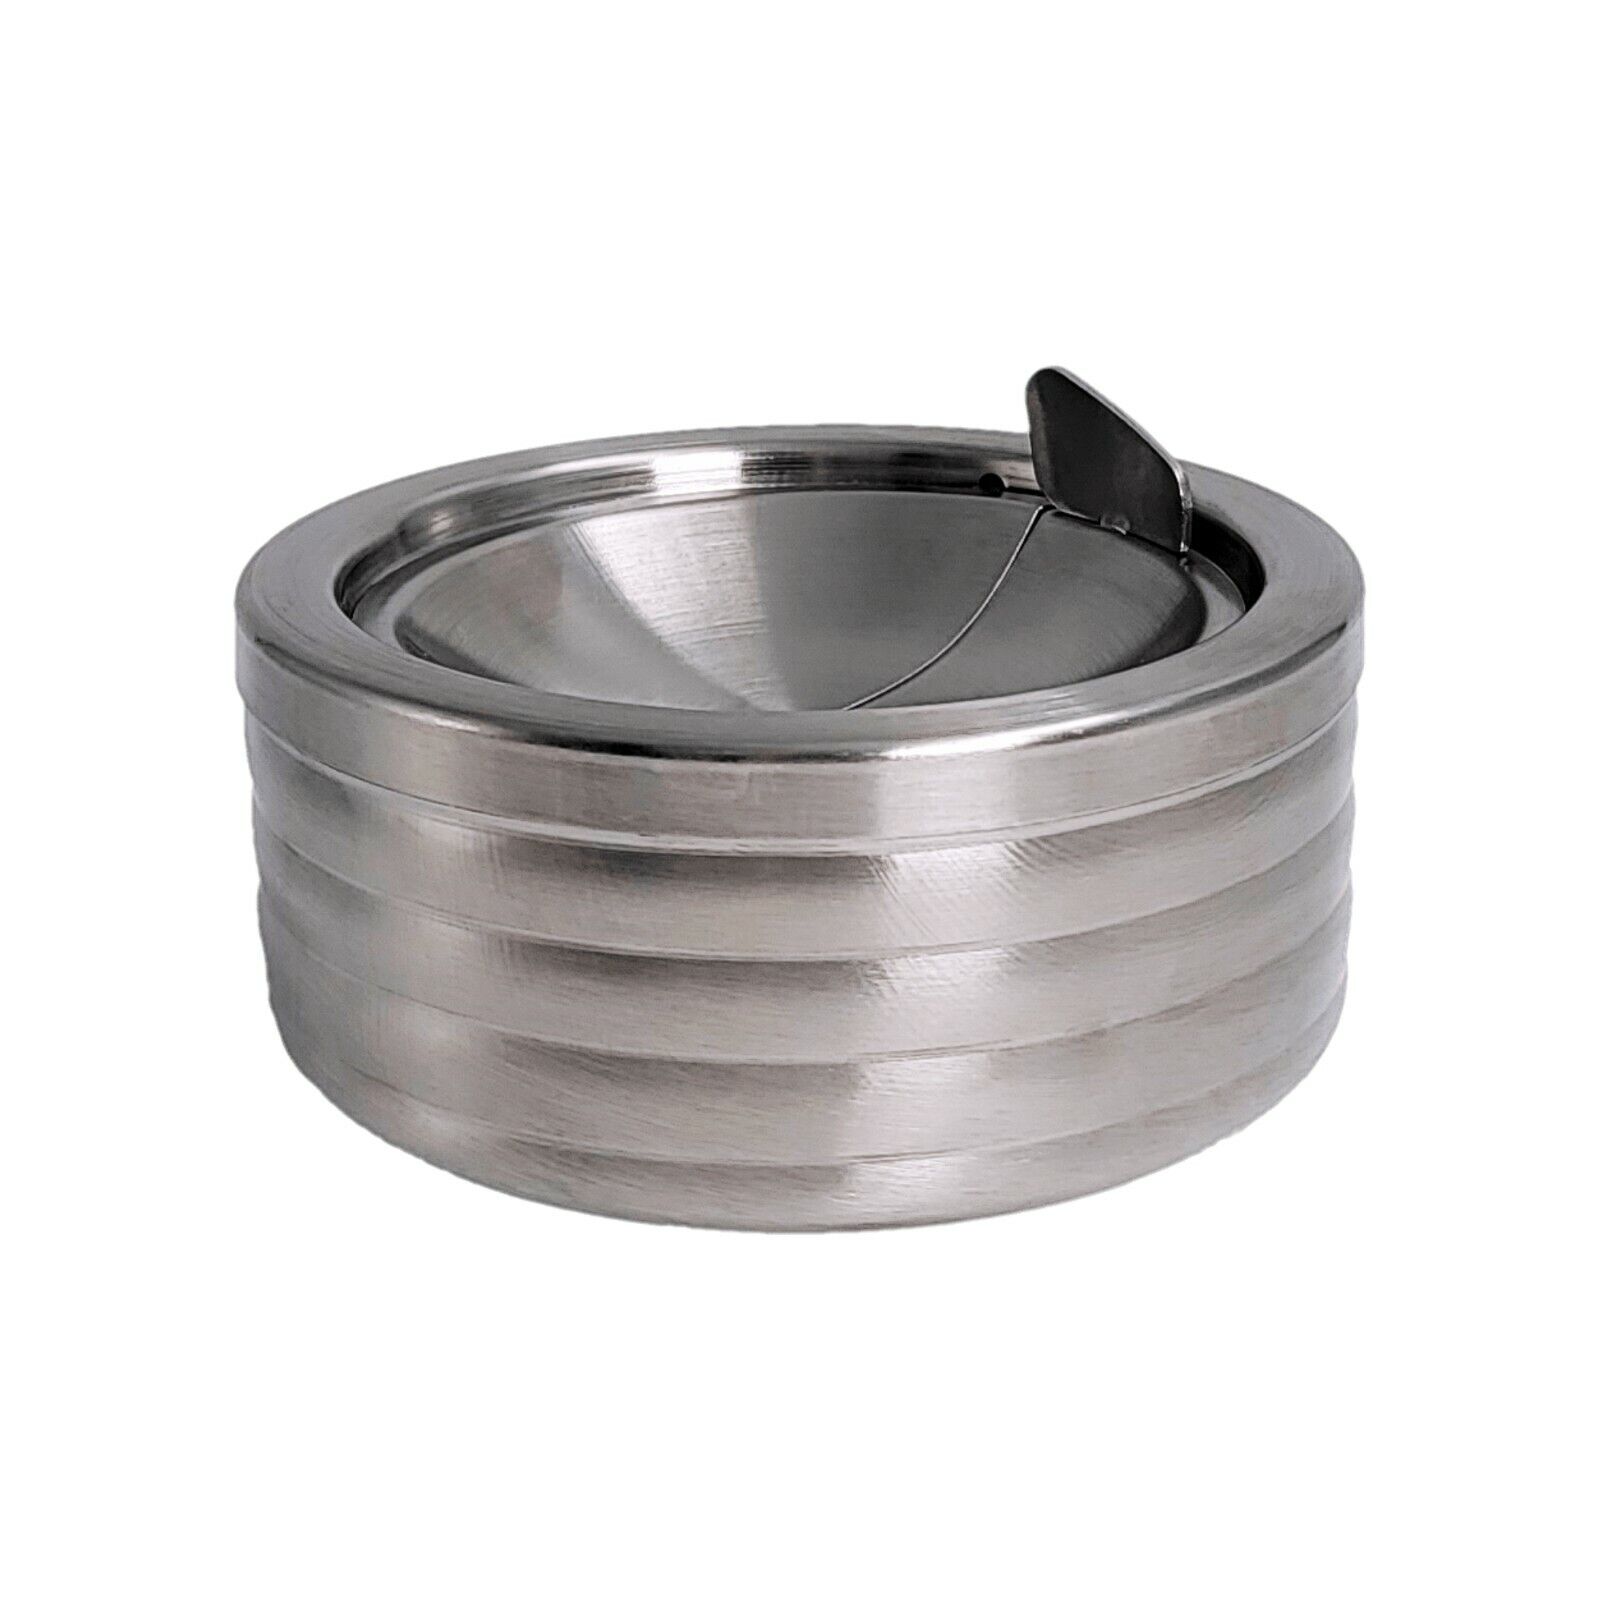 Grooved Silver Smokeless Classic Metal Ashtray with a Lid for Cigarettes